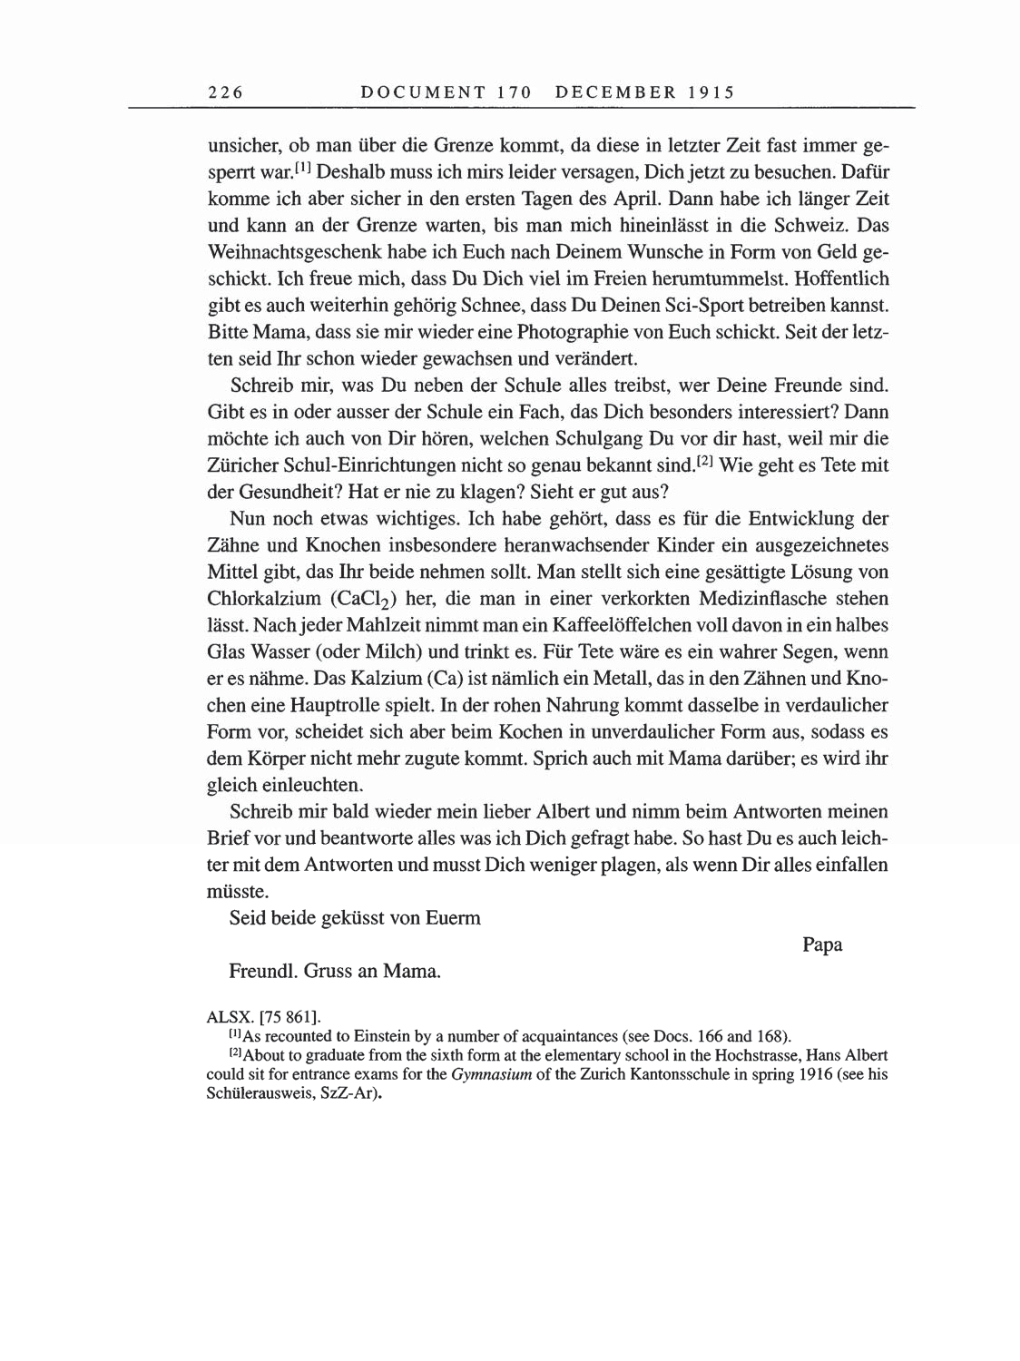 Volume 8, Part A: The Berlin Years: Correspondence 1914-1917 page 226